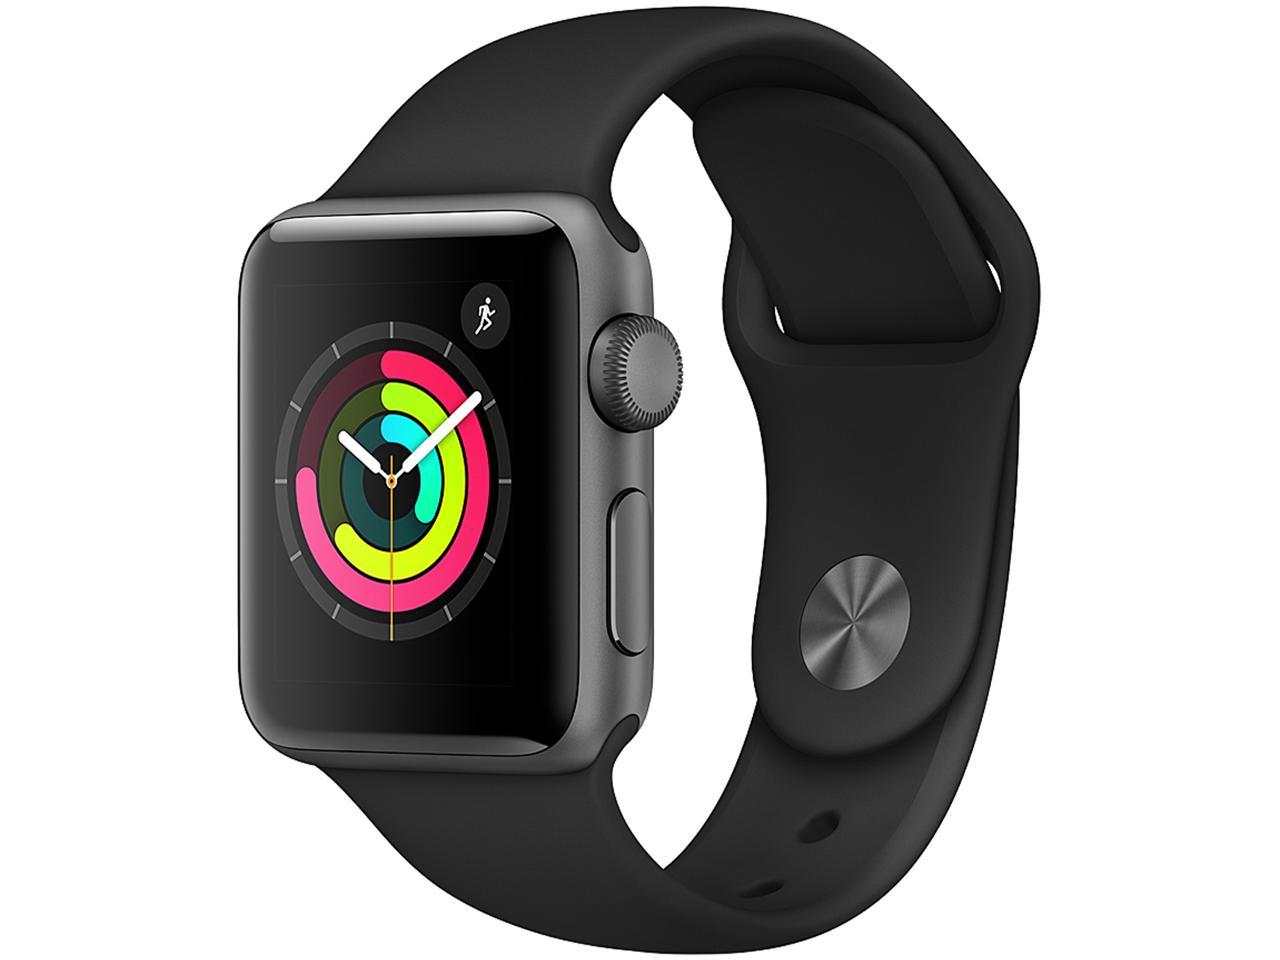 Apple Watch Series 3 (GPS), 38mm Space Gray Aluminum Case with Black Sport Band - Space Gray Aluminum